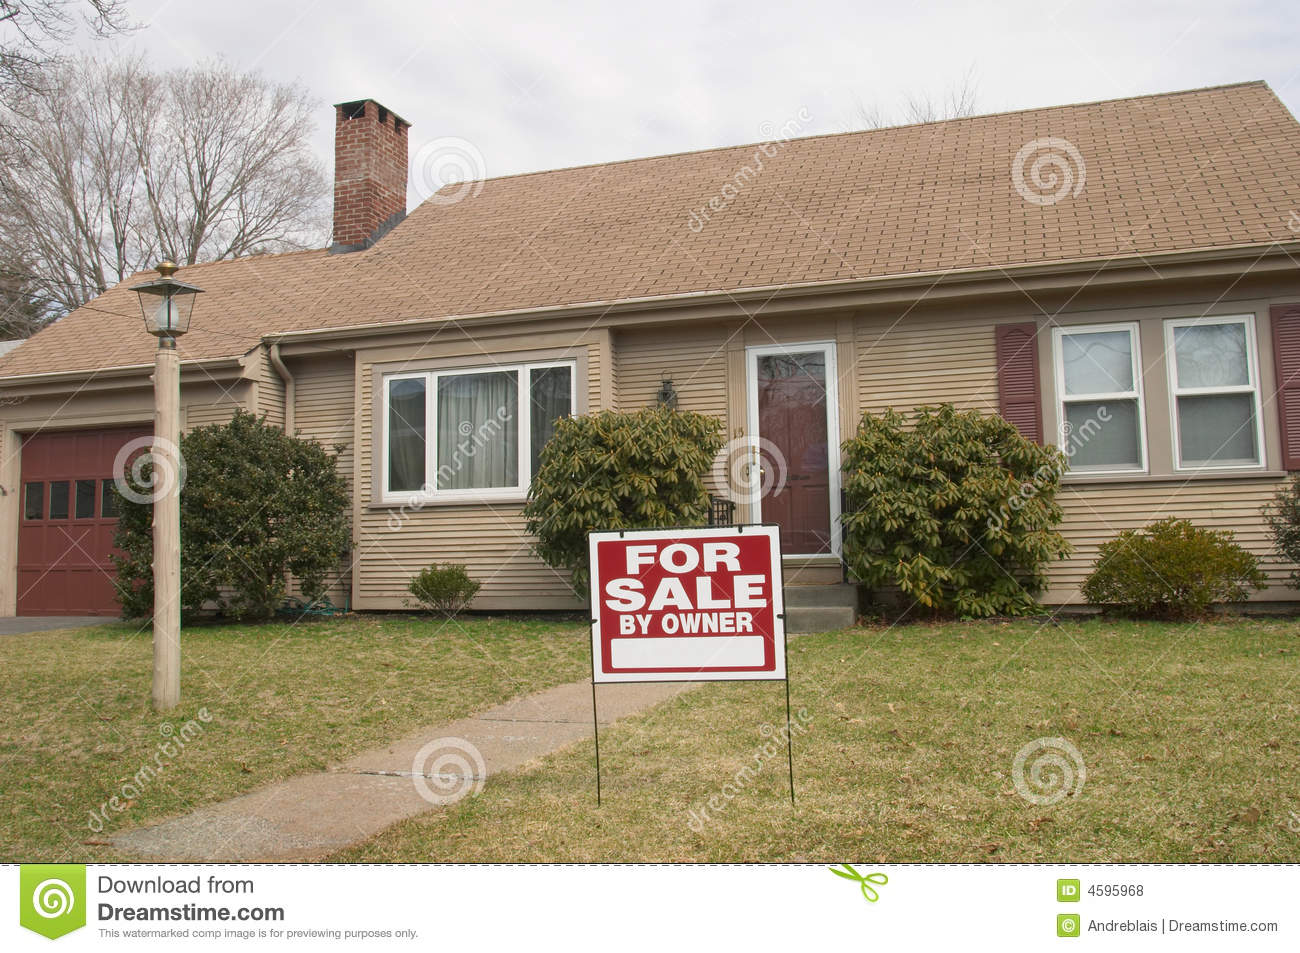 House for Sale by Owner Sign